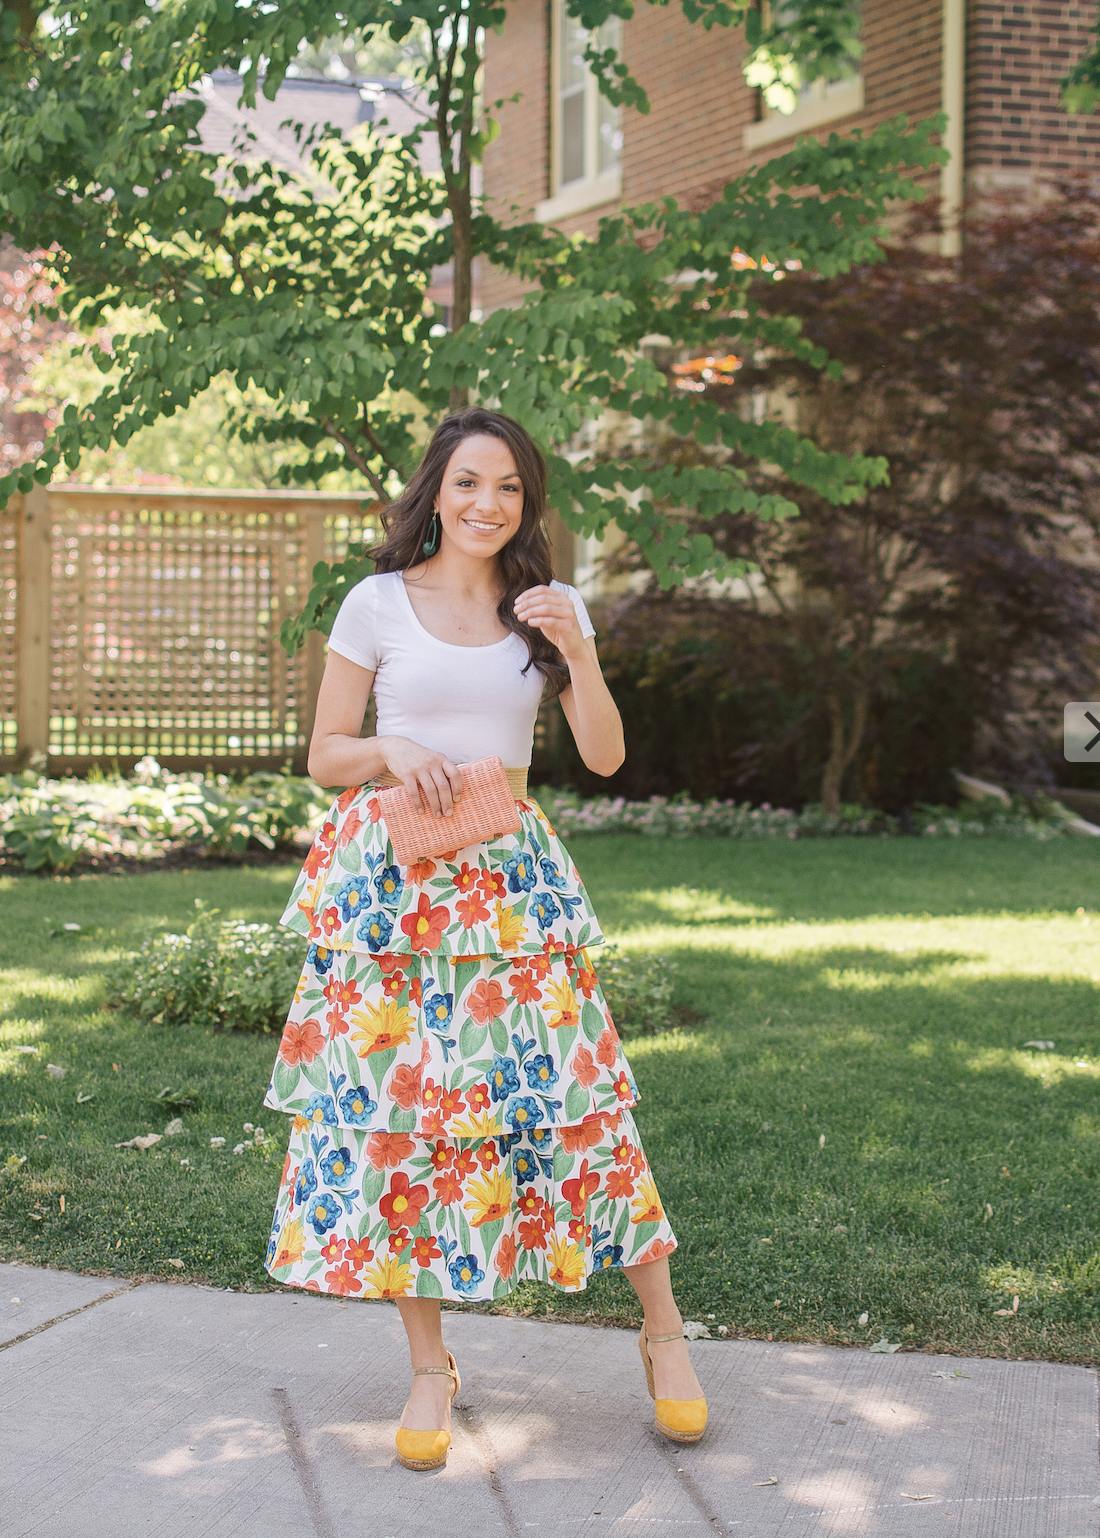 Statement Skirts For Summer